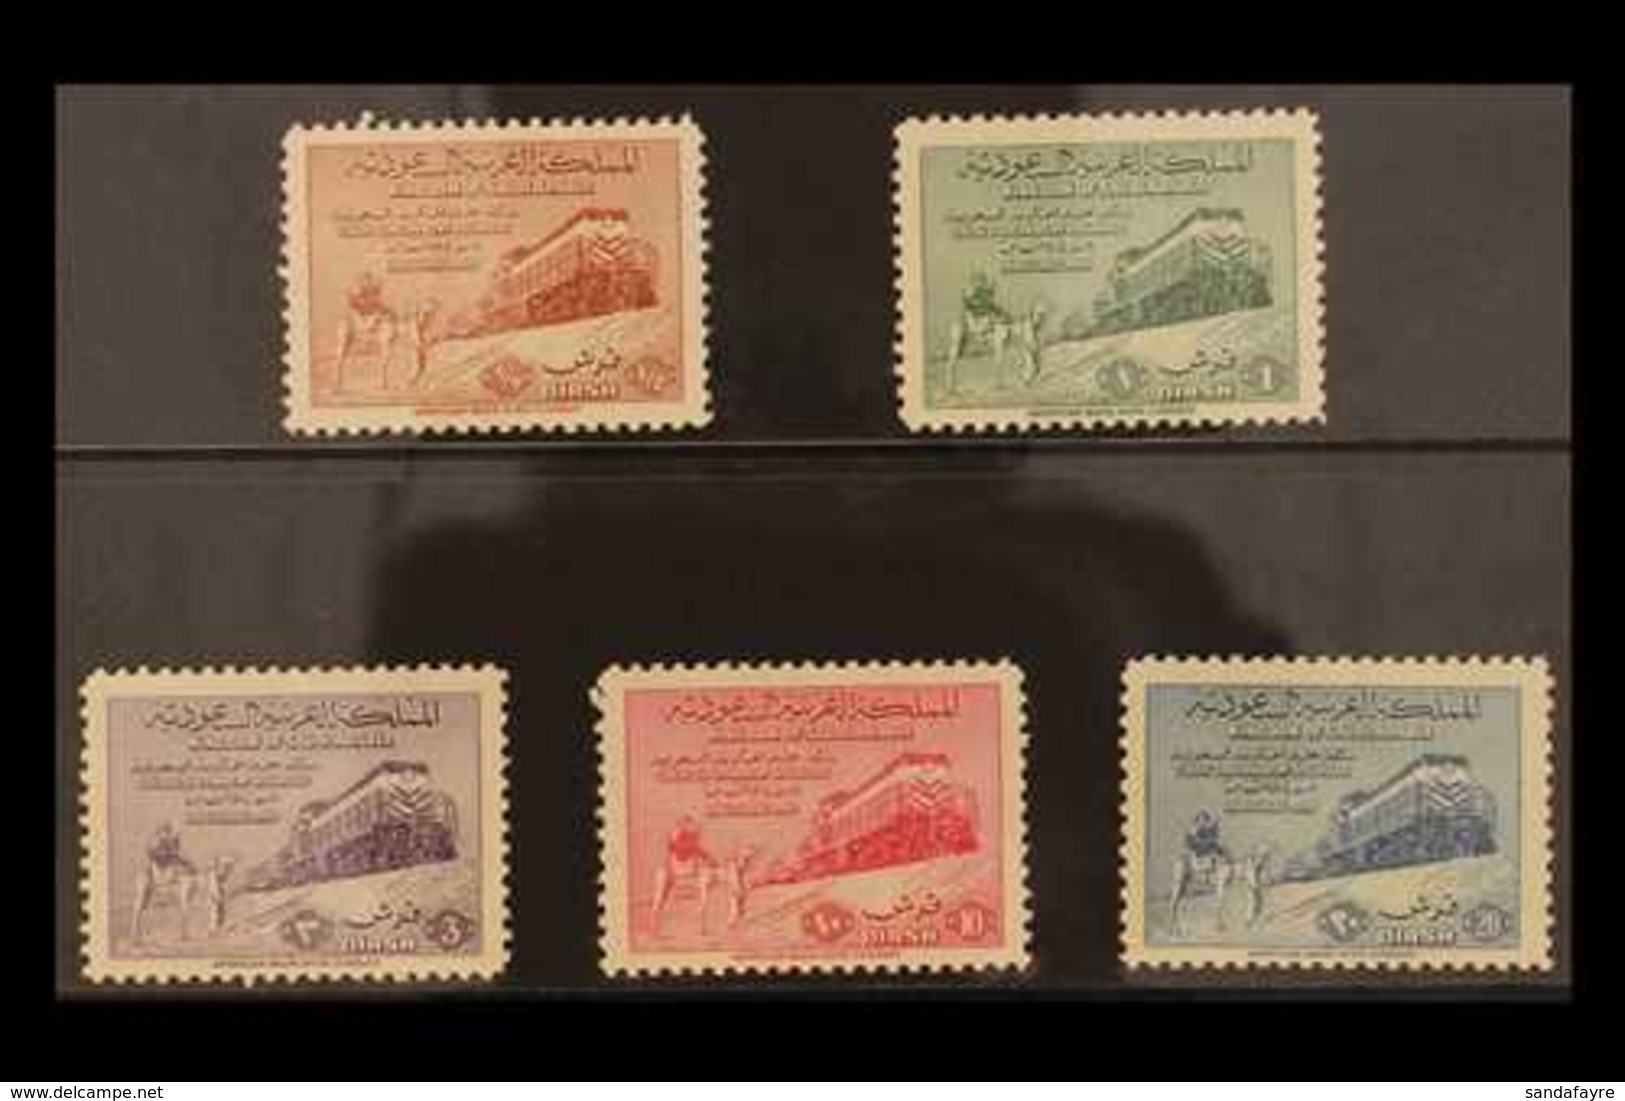 1952 Inauguration Of Dammam-Riyadh Railway Complete Set, SG 372/376, Never Hinged Mint. (5 Stamps) For More Images, Plea - Saudi Arabia